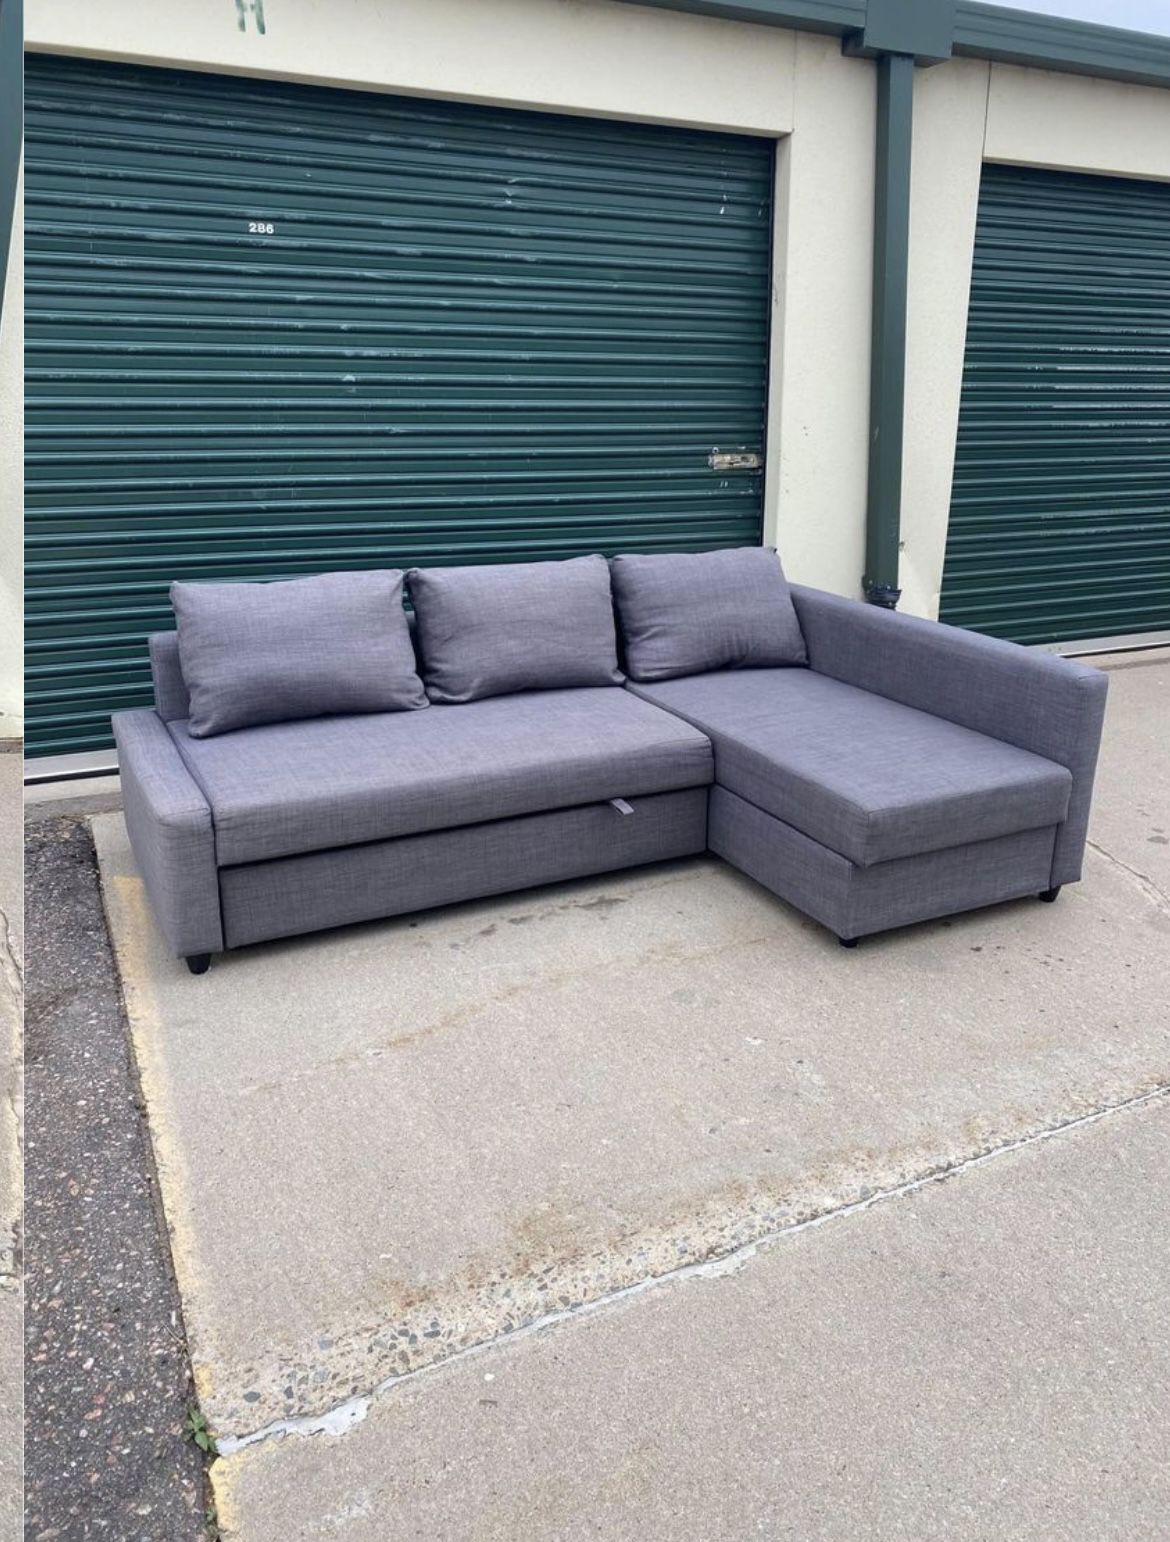 🚚 FREE DELIVERY ! Beautiful Modern L shaped Couch with Storage & Pullout